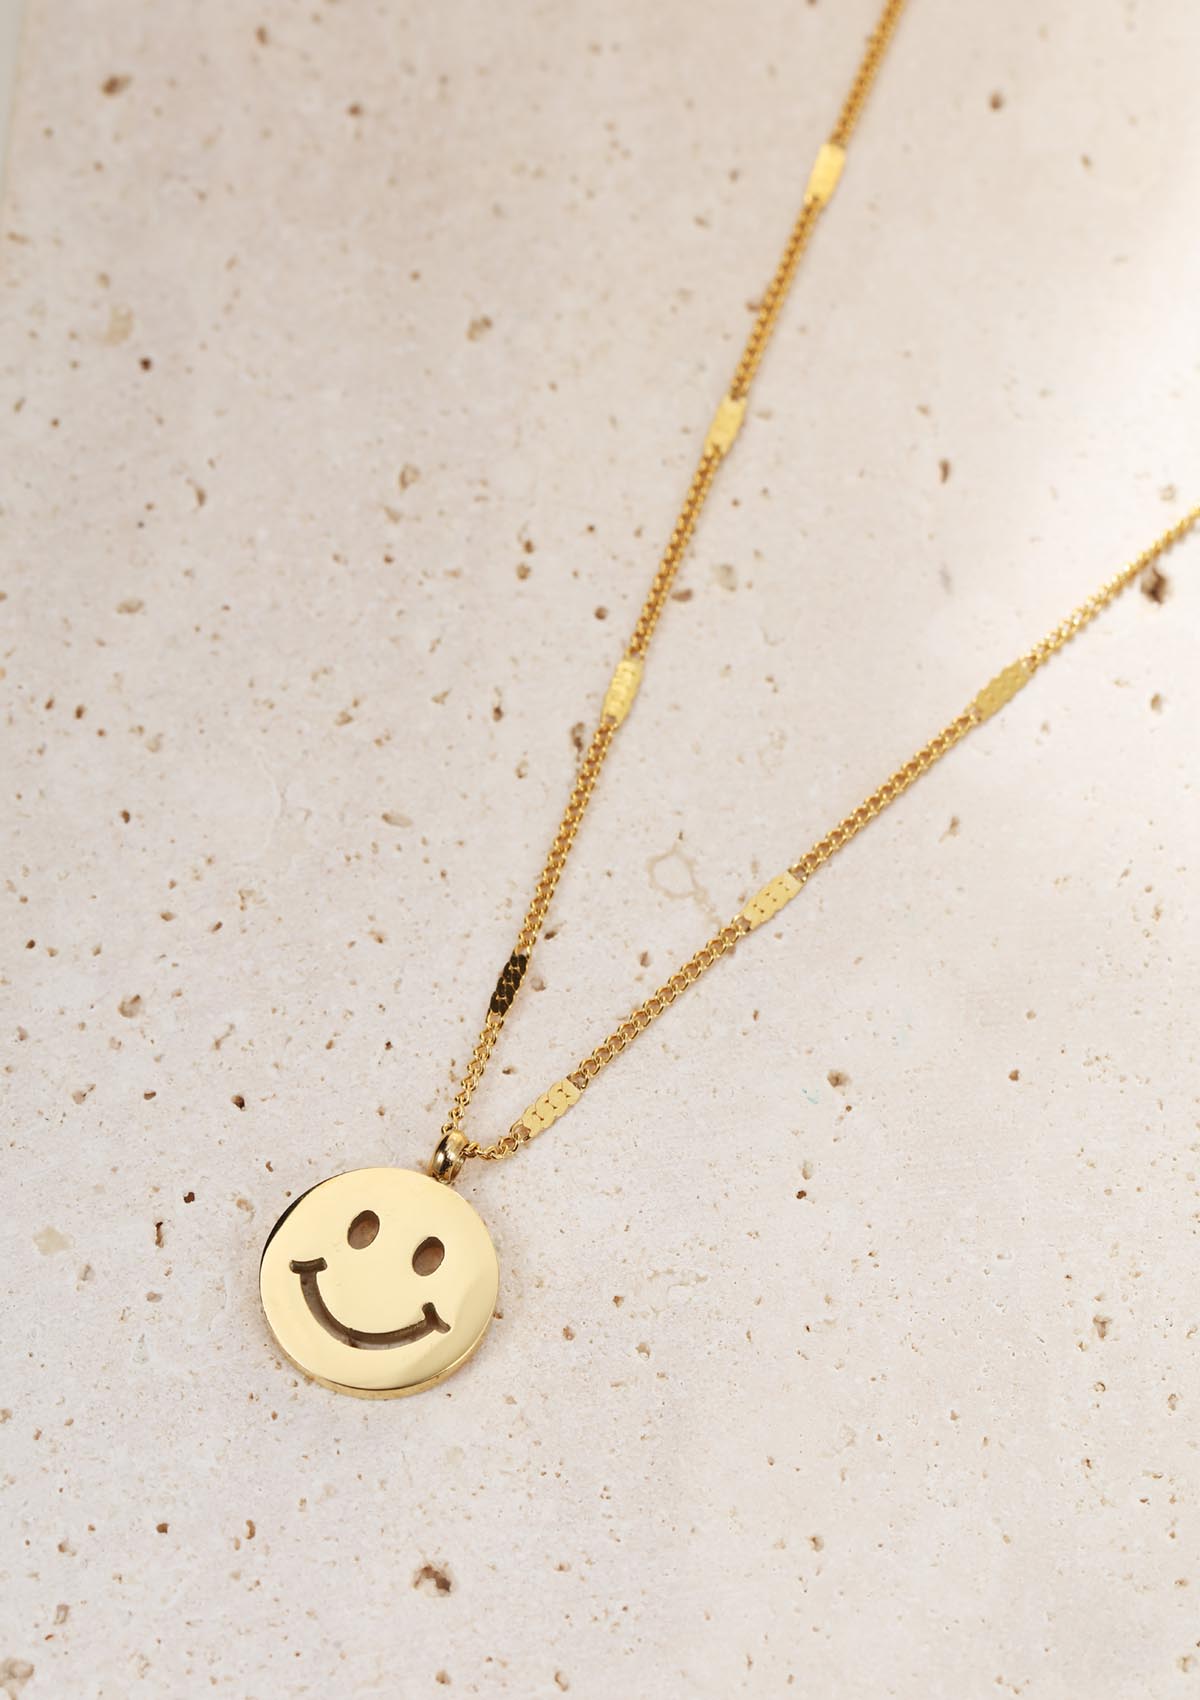 Kette Smiley Gesicht Anhänger Sterlingsilber Happiness in Gold – Hey